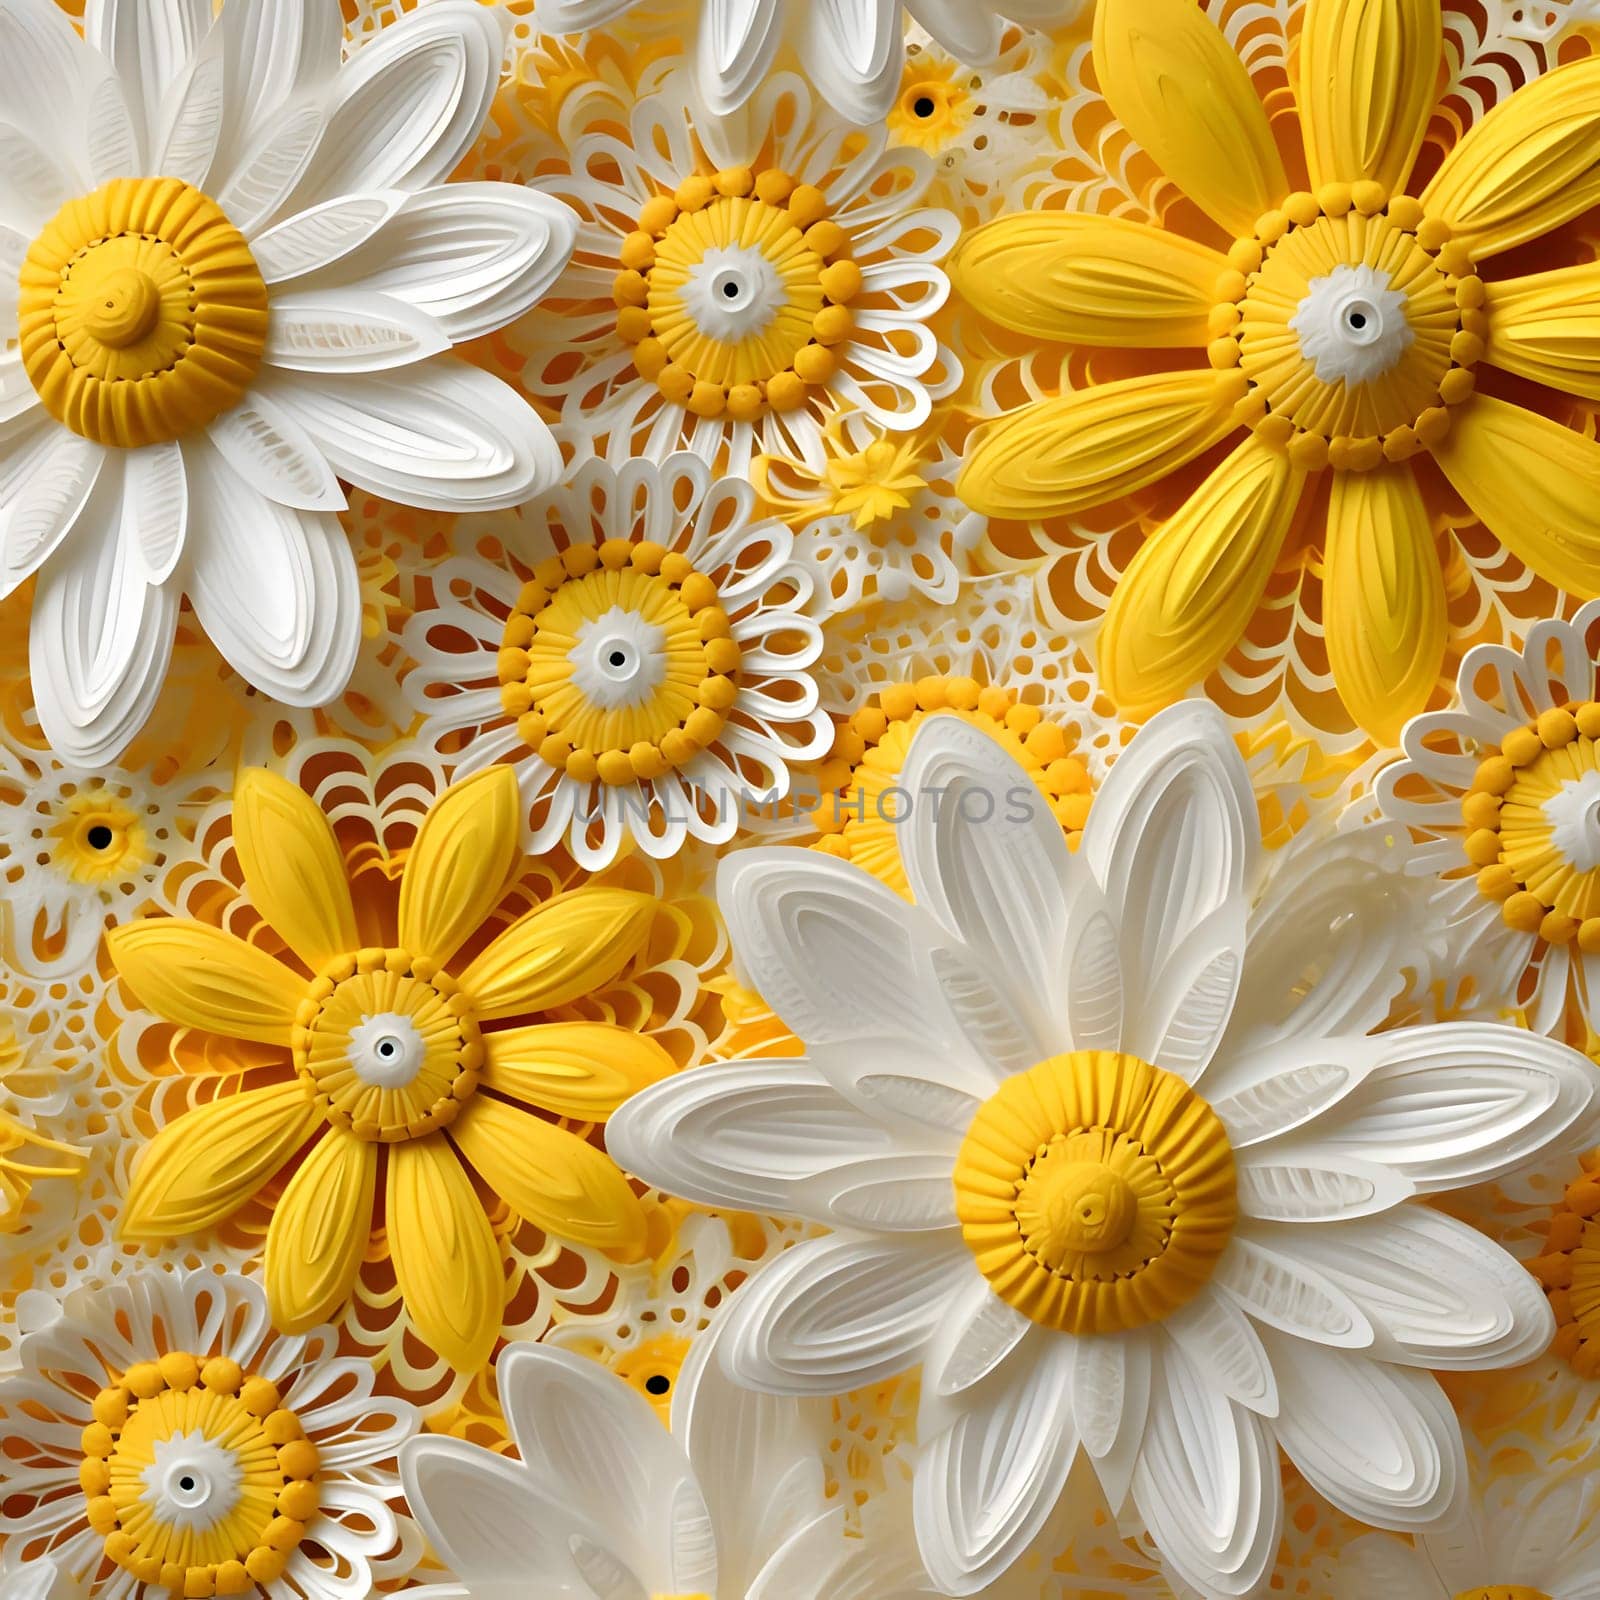 Patterns and banners backgrounds: Floral pattern of white and yellow daisies on a white background